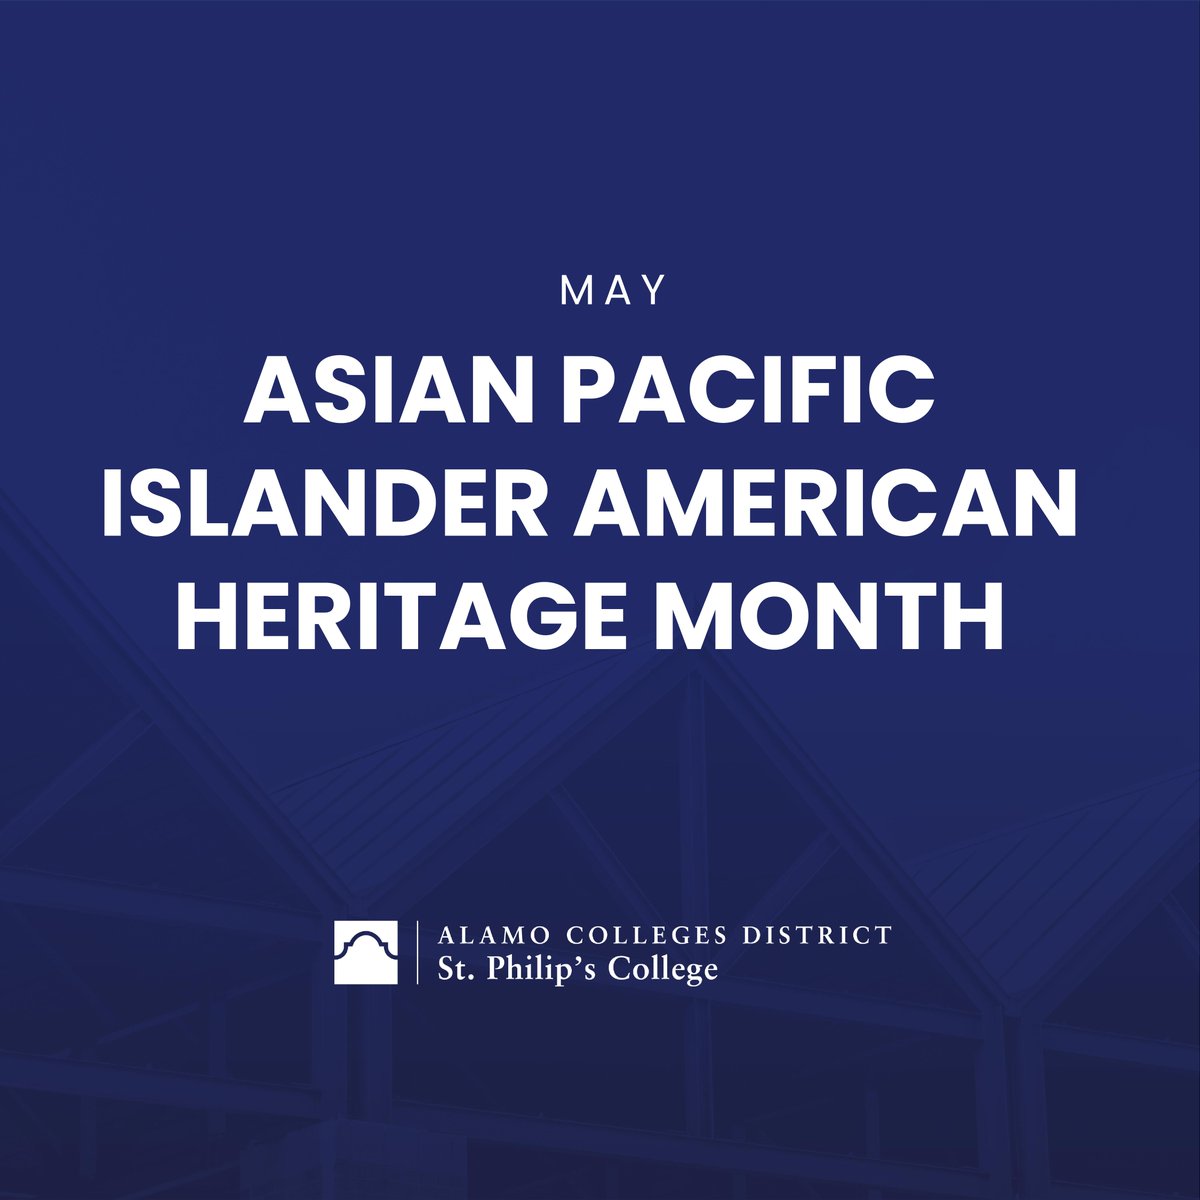 This May, we're honored to recognize Asian Pacific Islander Heritage Month!